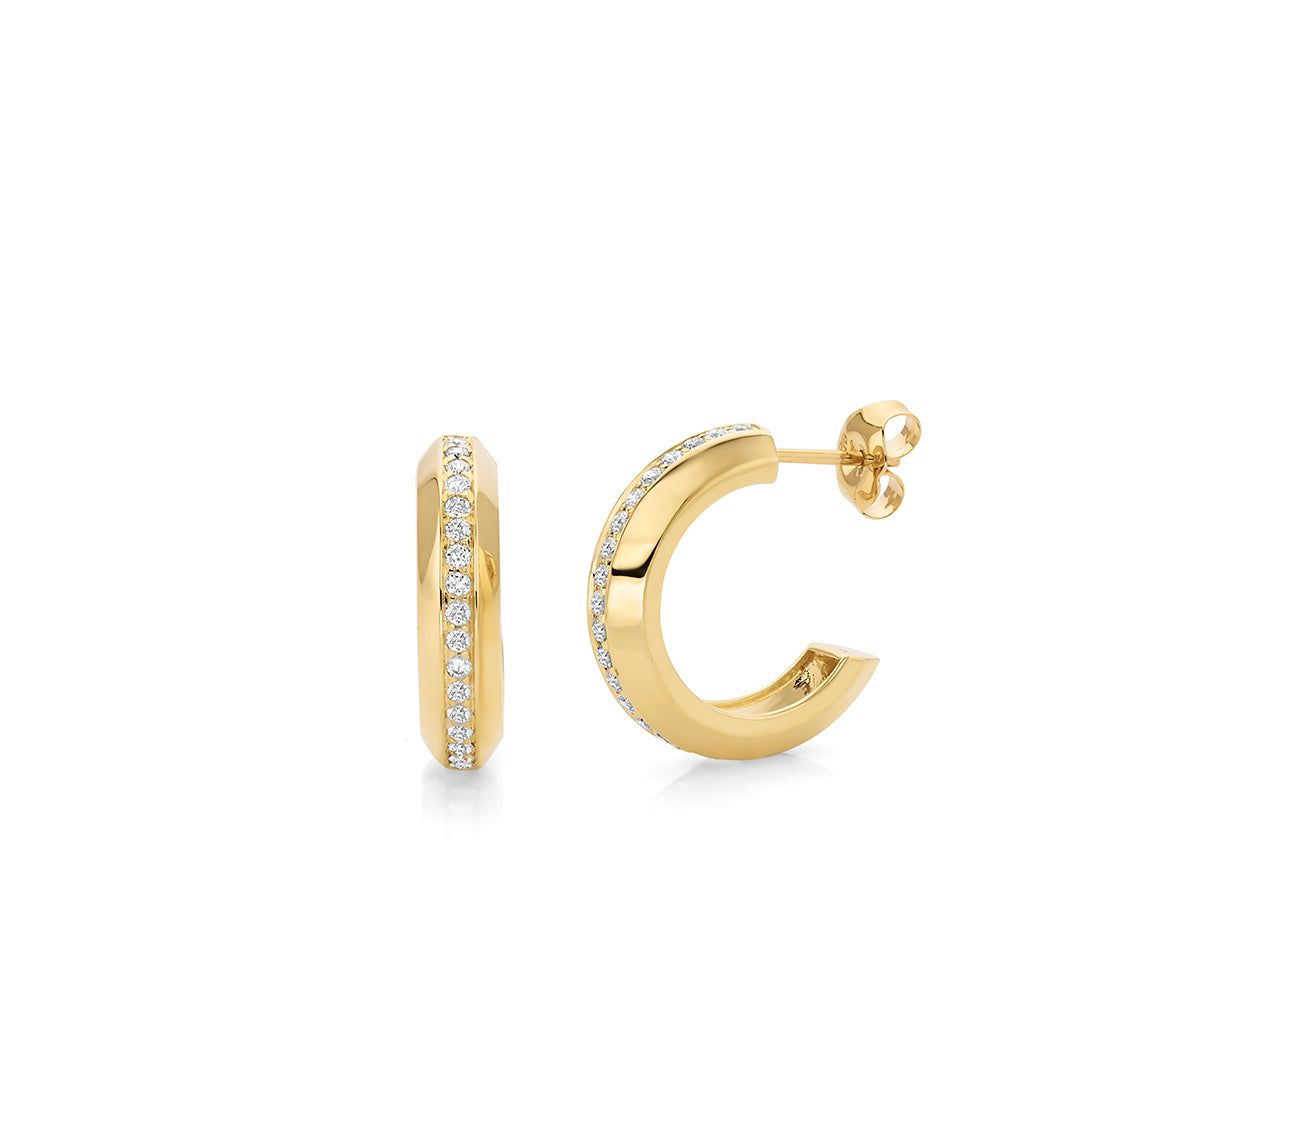 MICHAEL M Earrings 14K Yellow Gold Large Pavé Luxe Link Hoops